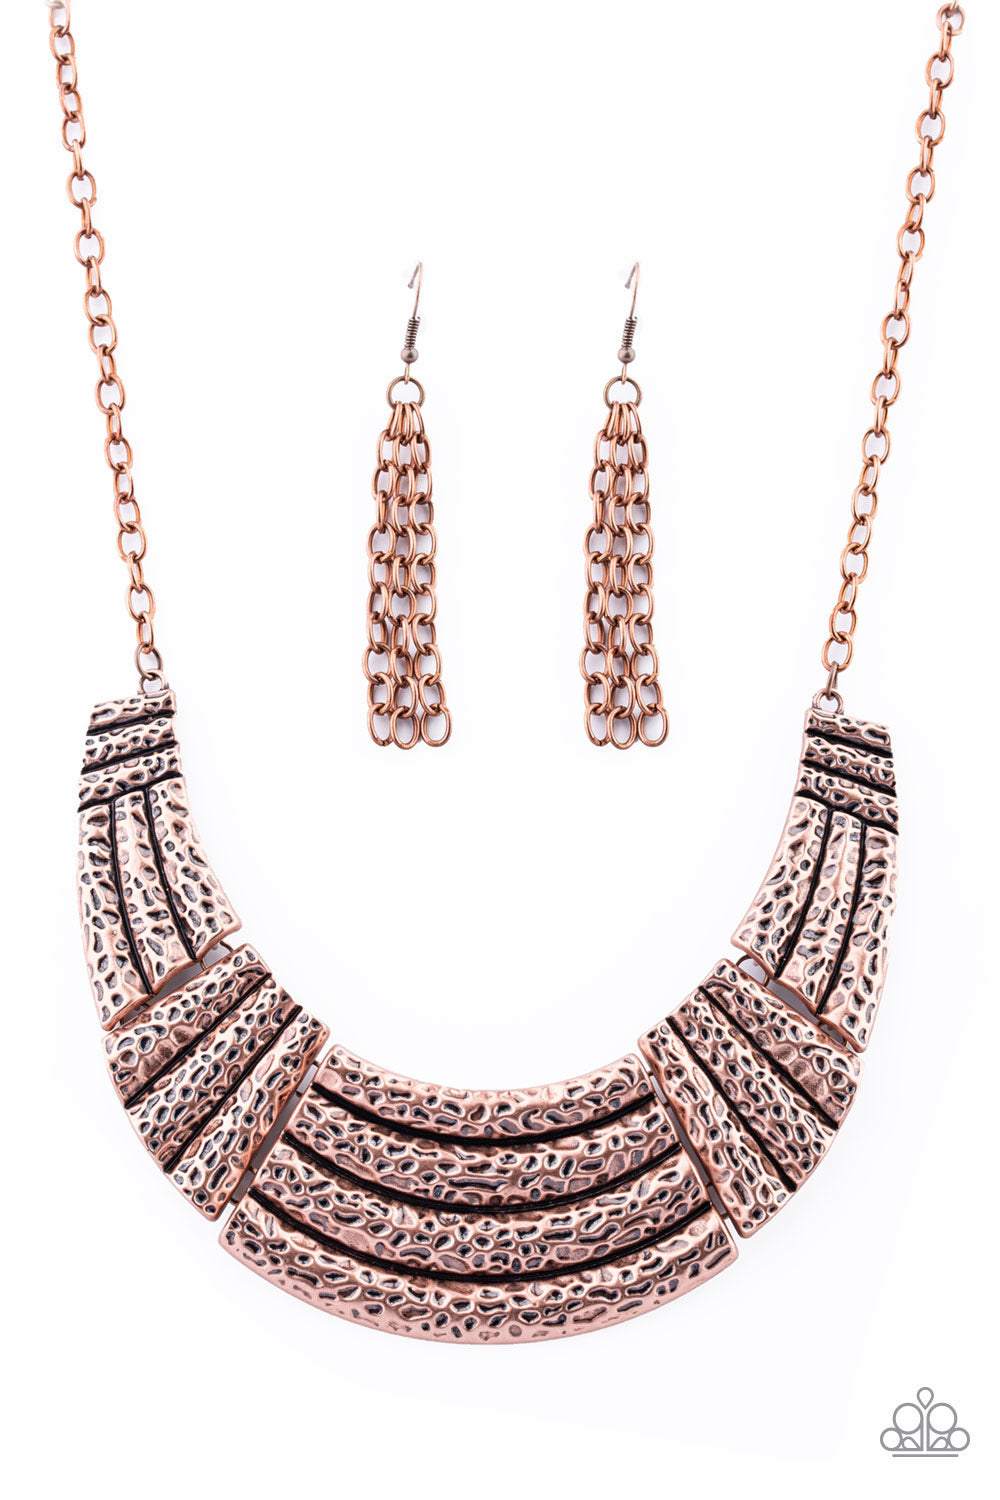 Paparazzi Ready To Pounce Copper Short Necklace